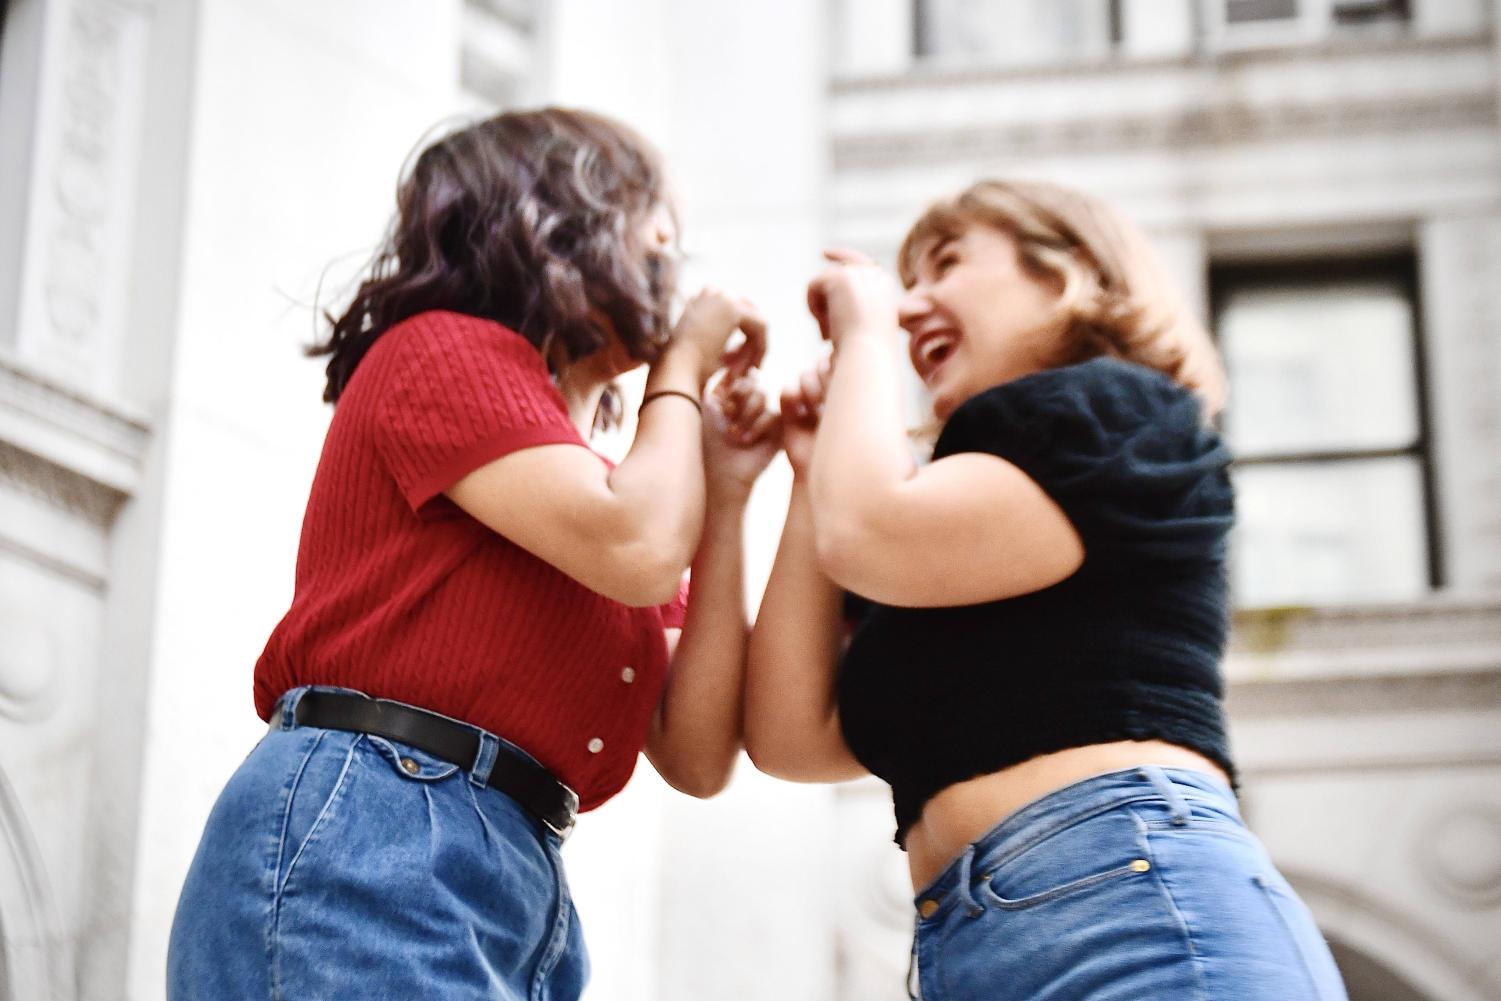 Two people jump toward each other excitedly. One has blonde, short hair, and is smiling. They are wearing a black crop top and blue jeans. The other person, on the left, wears a red short-sleeved sweater and blue jeans.